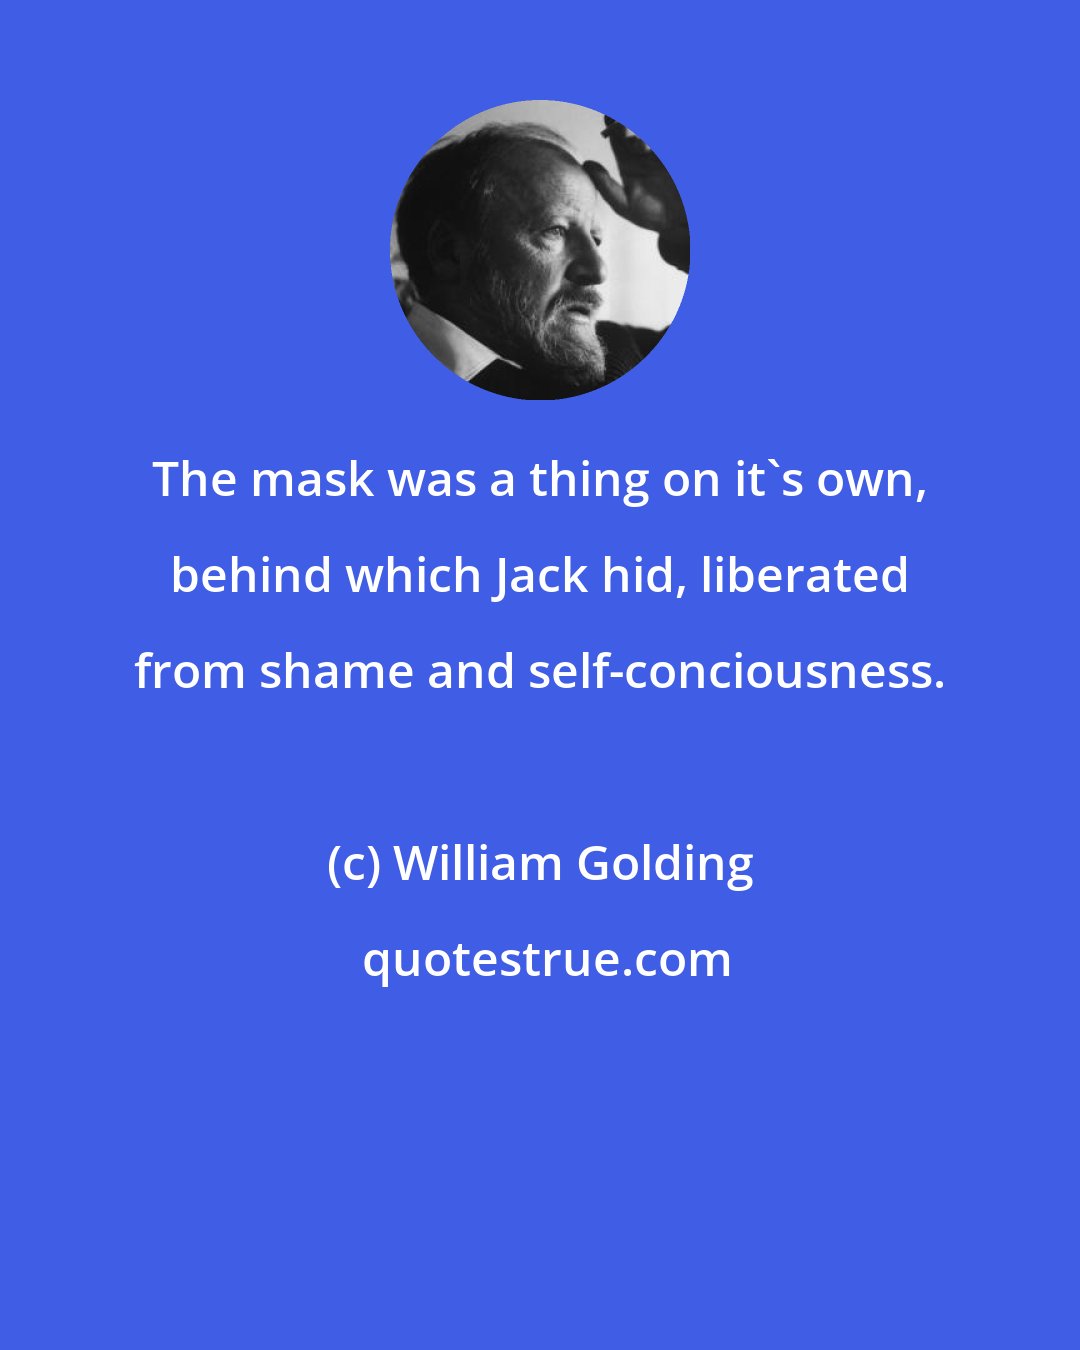 William Golding: The mask was a thing on it's own, behind which Jack hid, liberated from shame and self-conciousness.